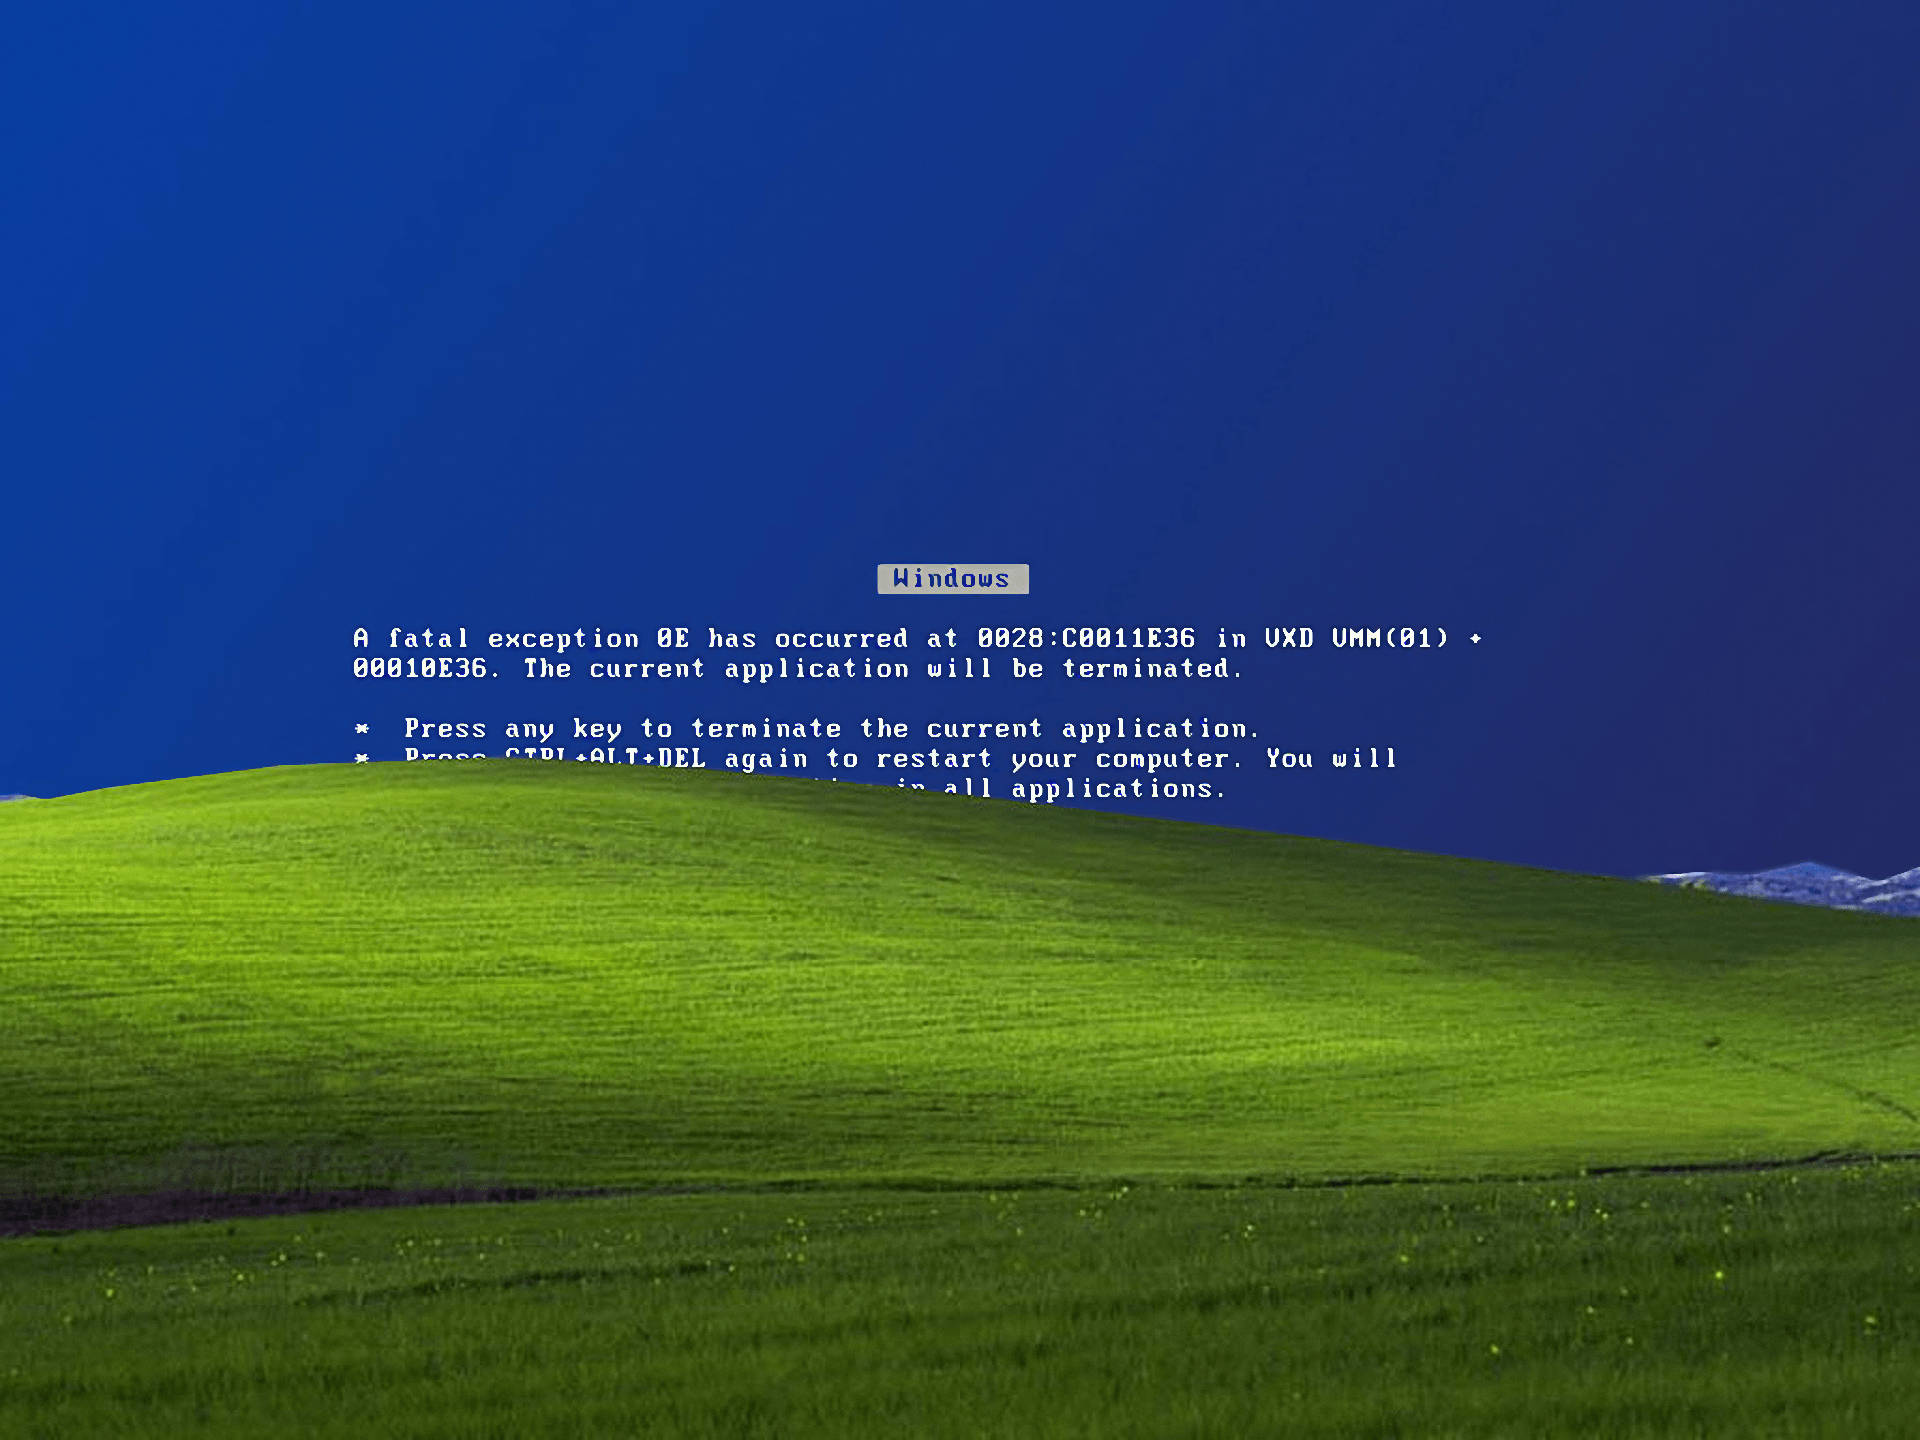 A Green Field With A Blue Sky And A Computer Screen Background